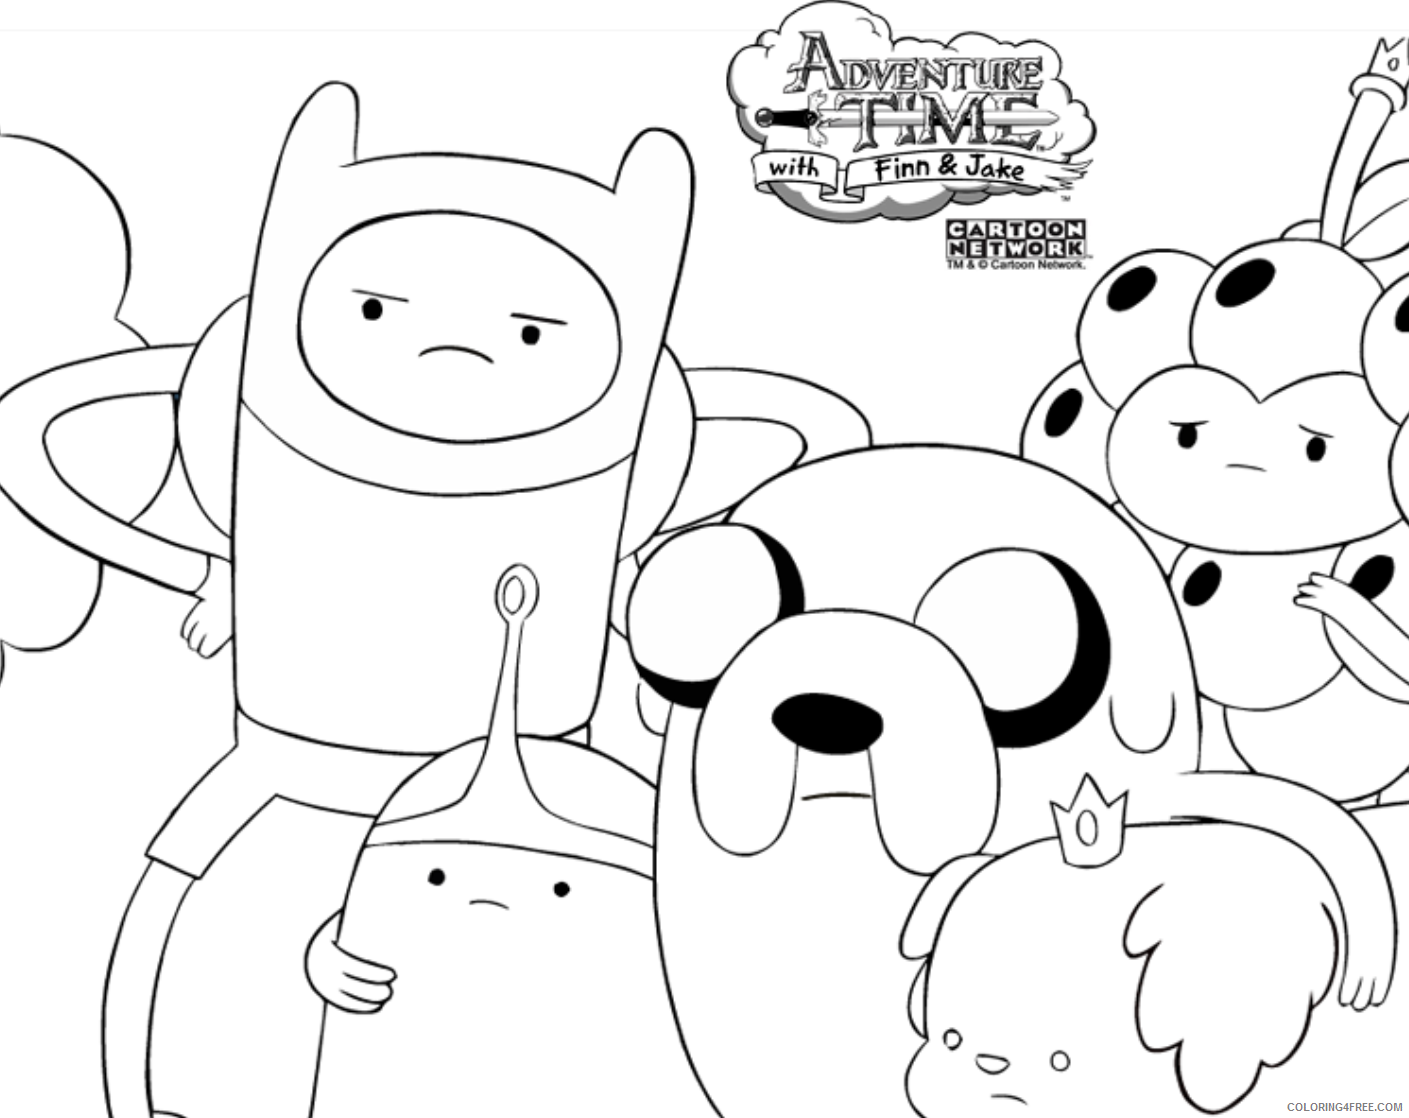 adventure time coloring pages free to print Coloring4free